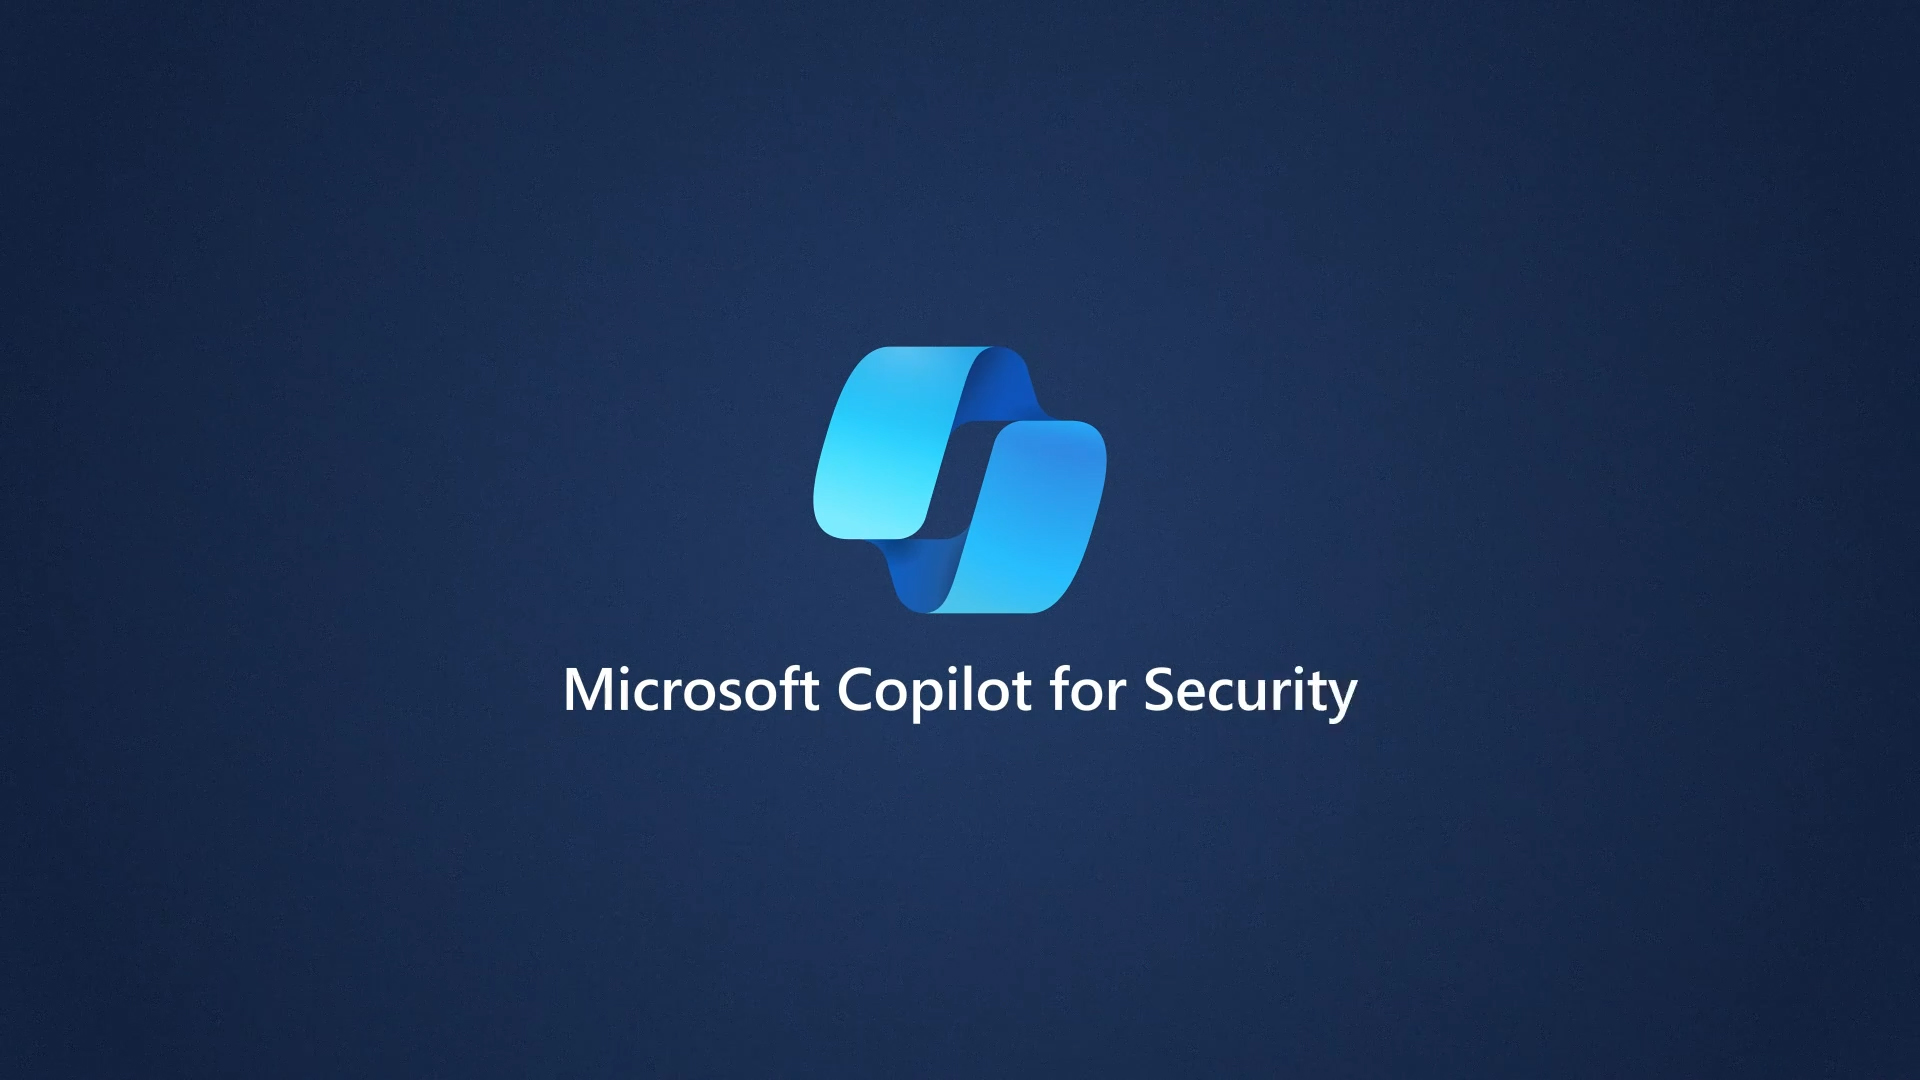 Microsoft says its Copilot for Security tool is a powerful weapon in the fight against hackers - here's why